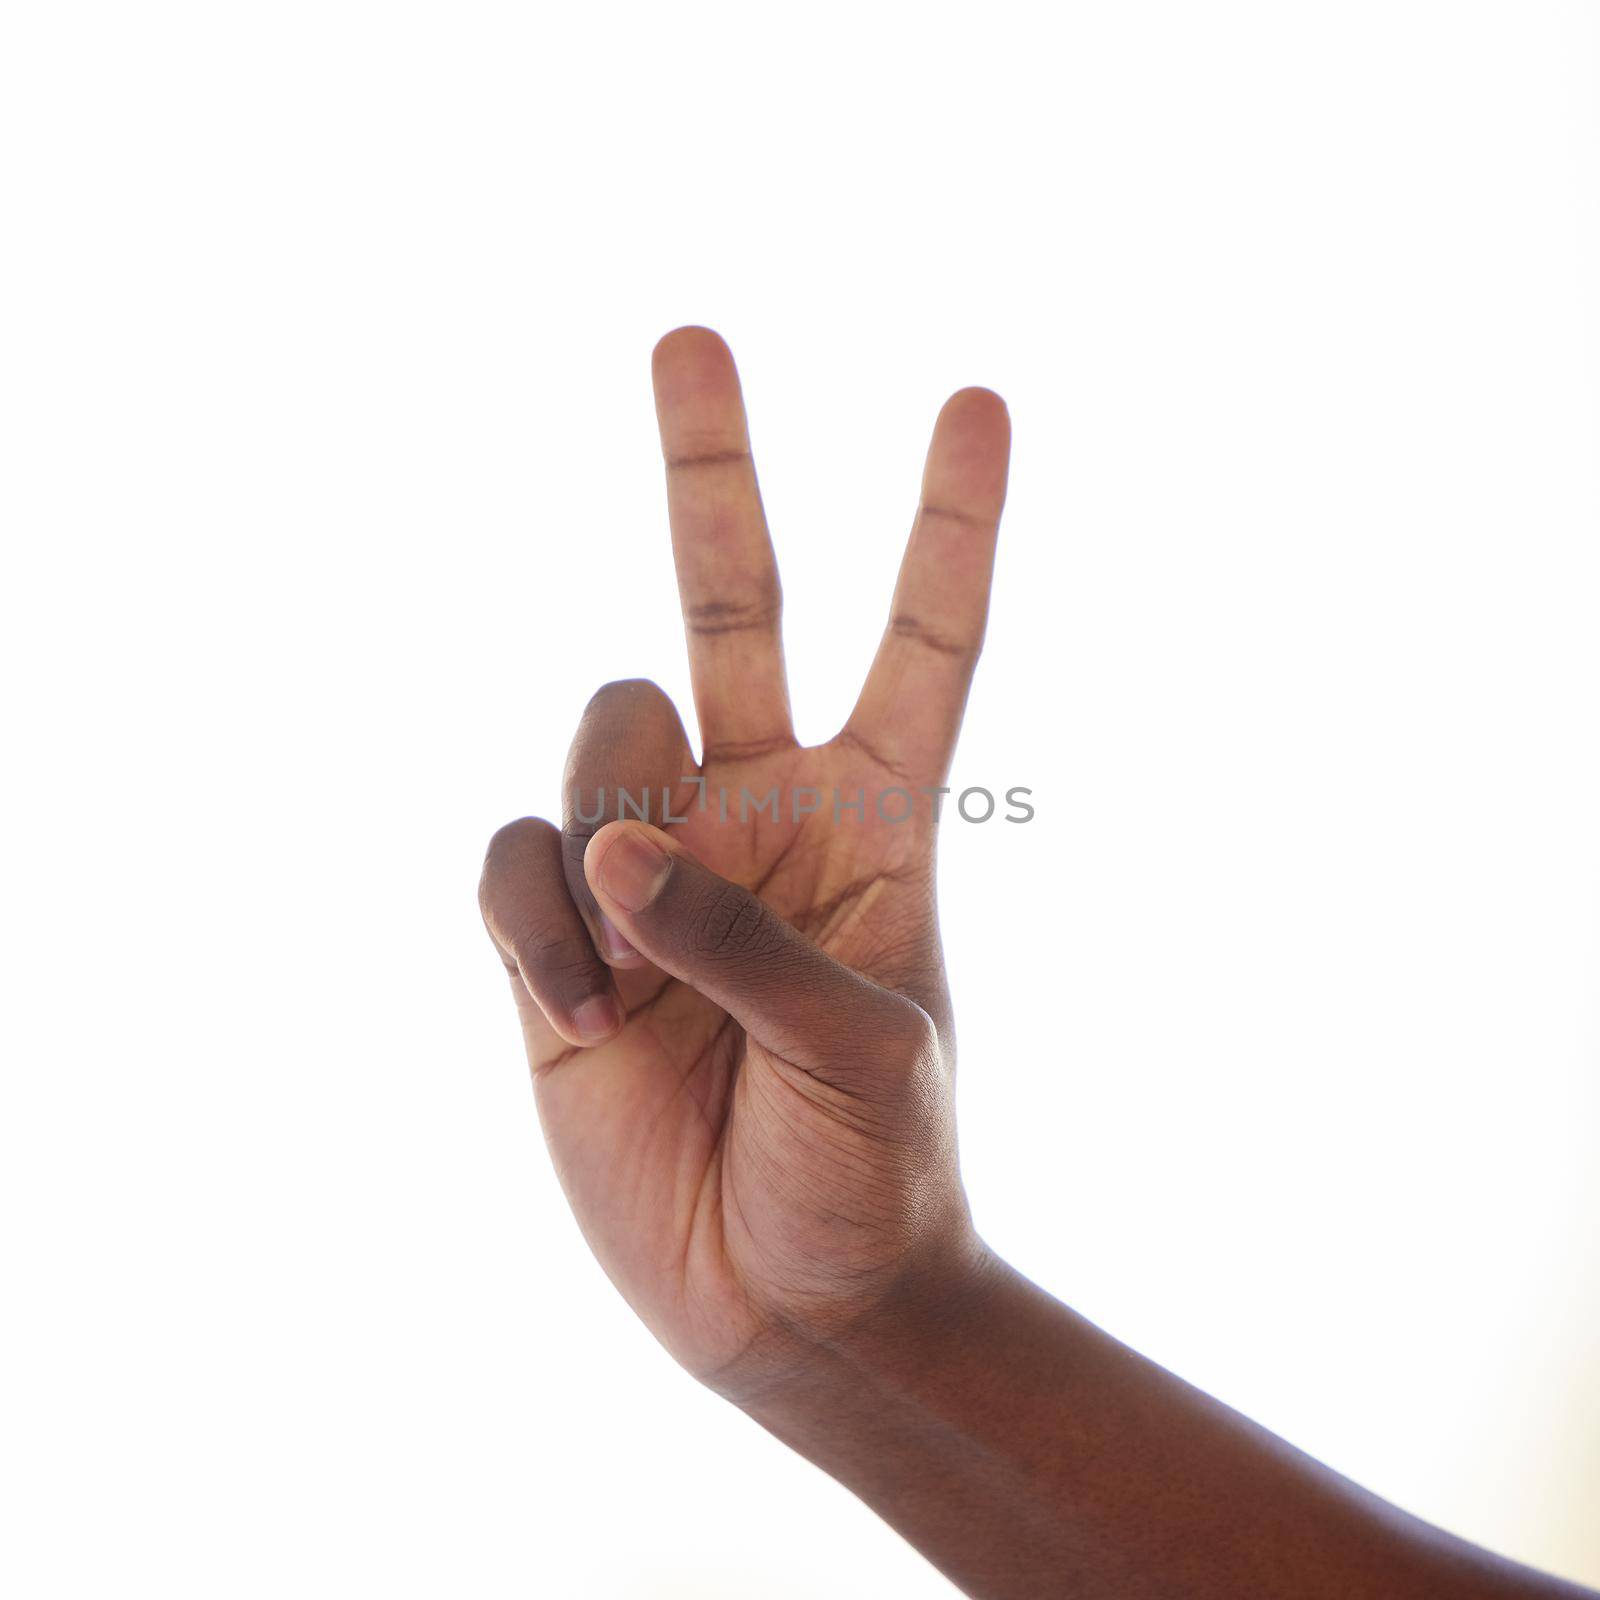 Studio shot of an unrecognisable man making a peace sign against a white background.